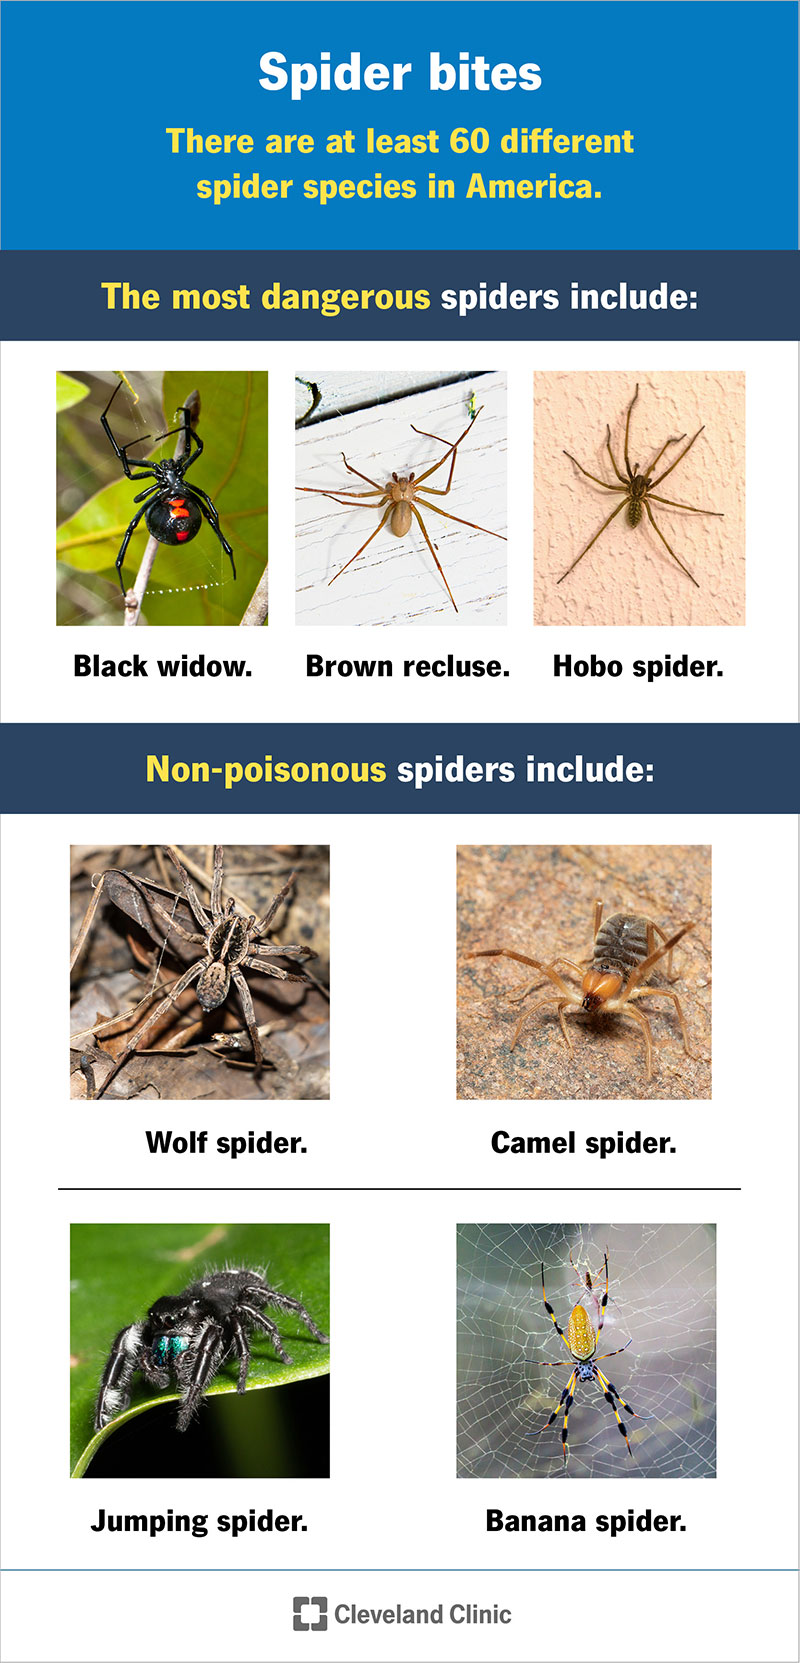 Black widows, brown recluses and hobo spiders are the most dangerous spiders in America